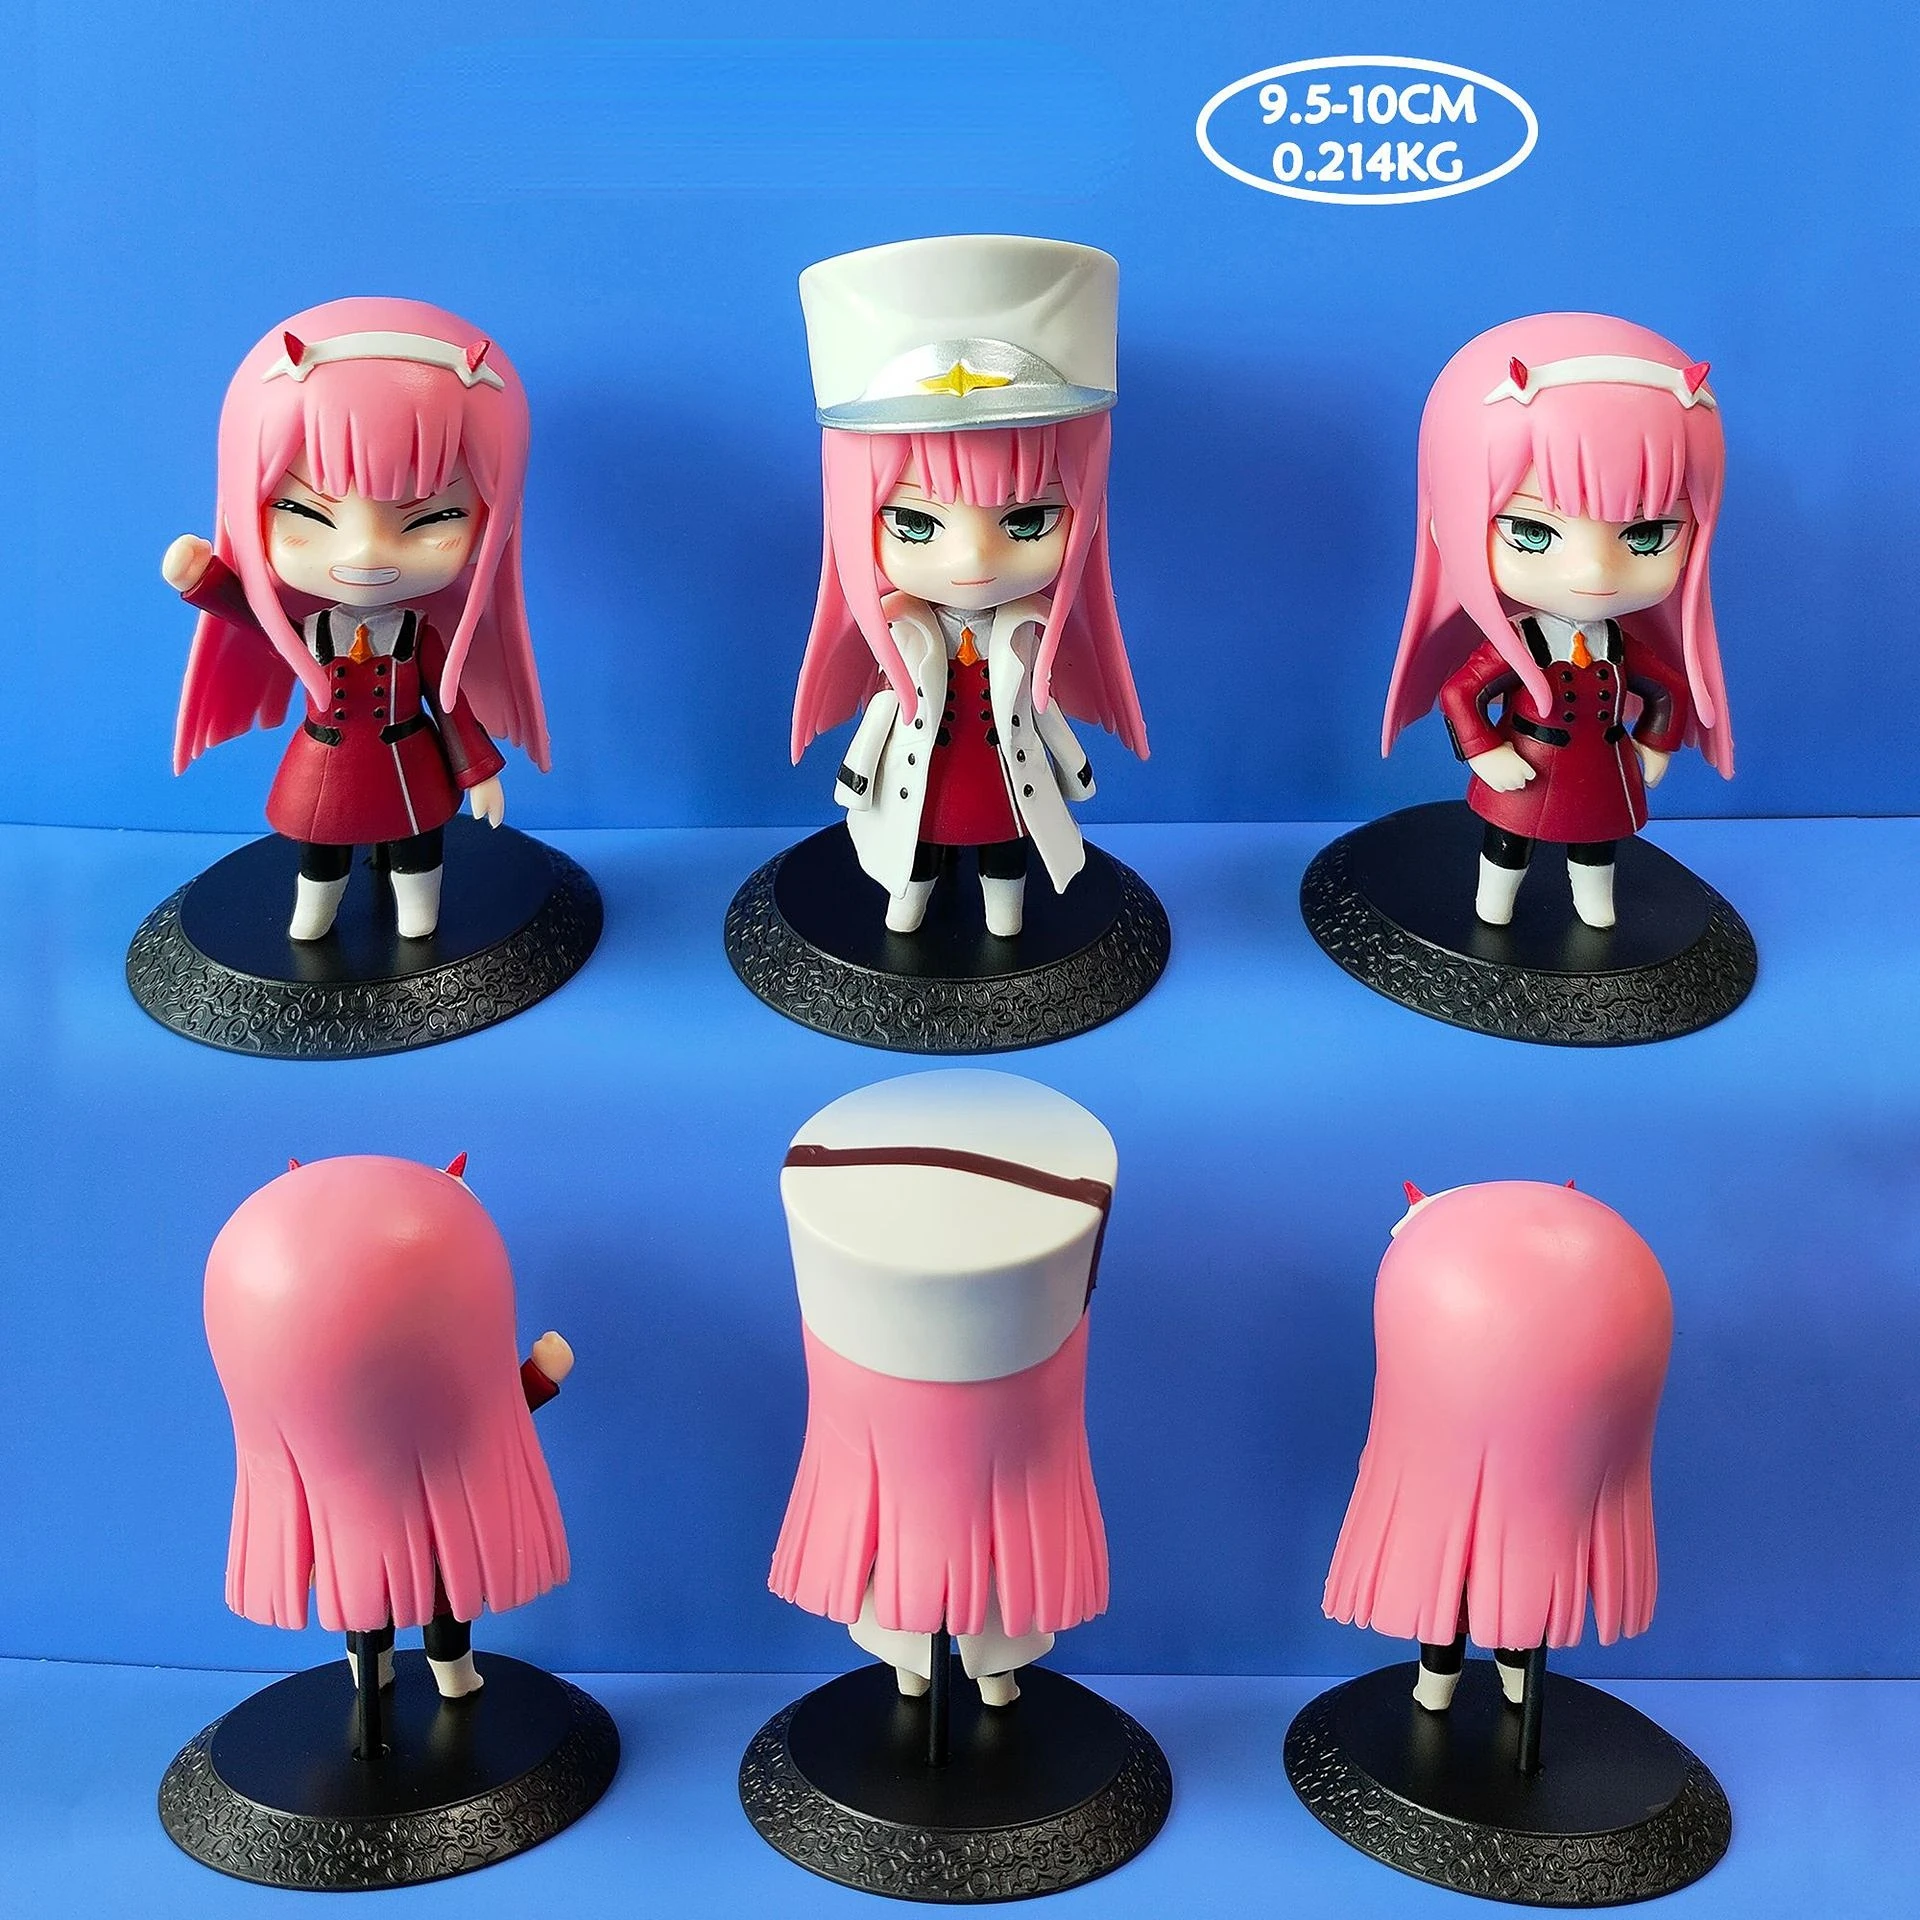 3pcs Q Version Darling In The FRANXX Anime Figure Zero Two 02 Paladinight PVC Action Figure Collectible Model Toys Kid Gift 10cm